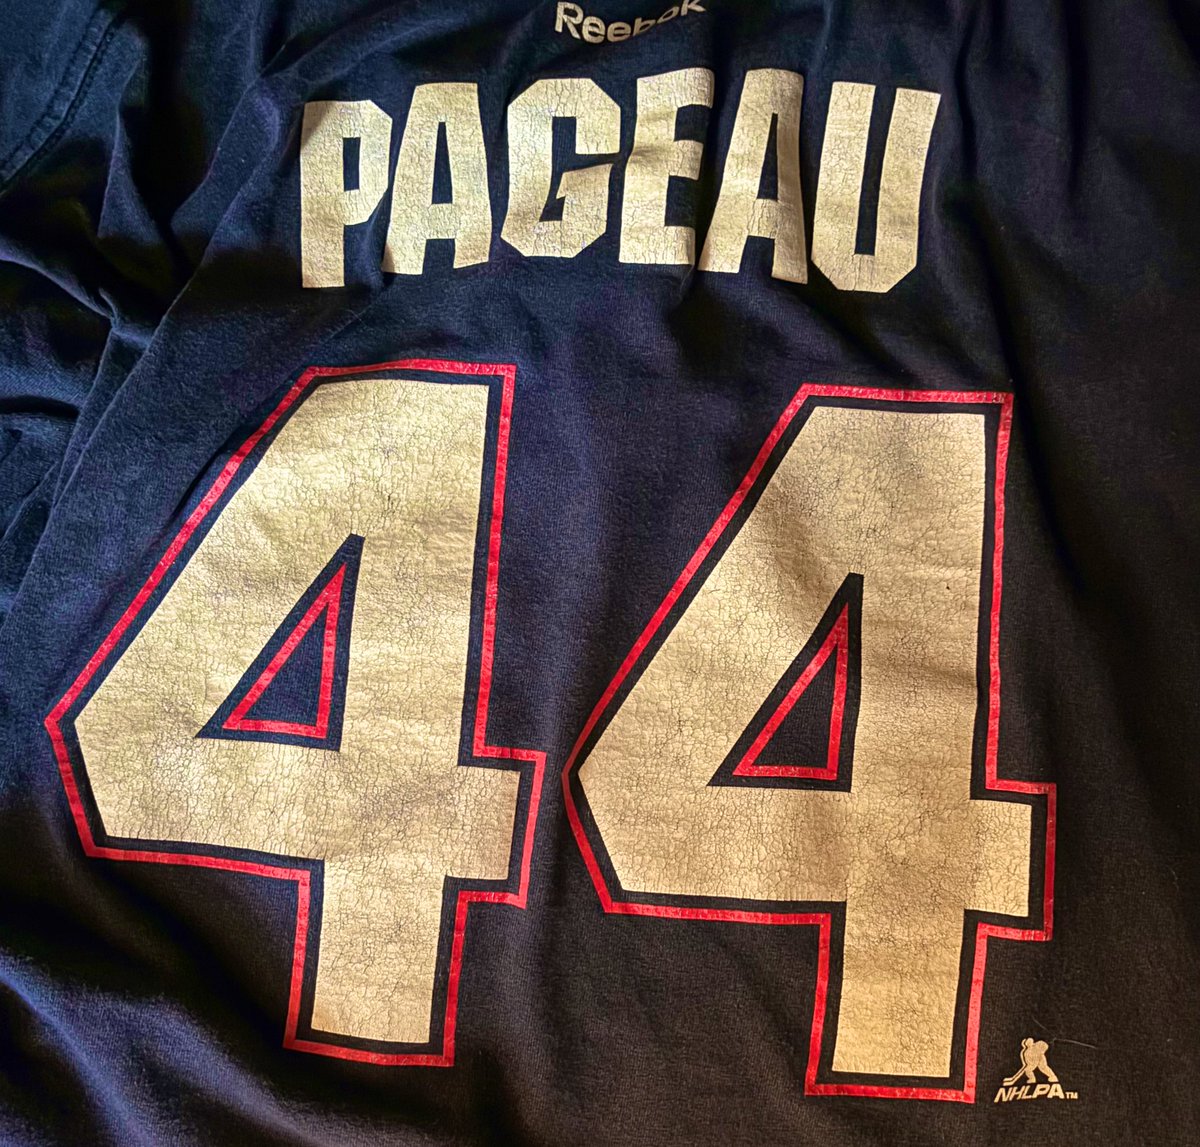 Something was telling me to wear this shirt today. One of the wildest nights that building has ever seen. Using the Habs own chant against them to create the Pageau chant will always be a very special moment for Sens fans.